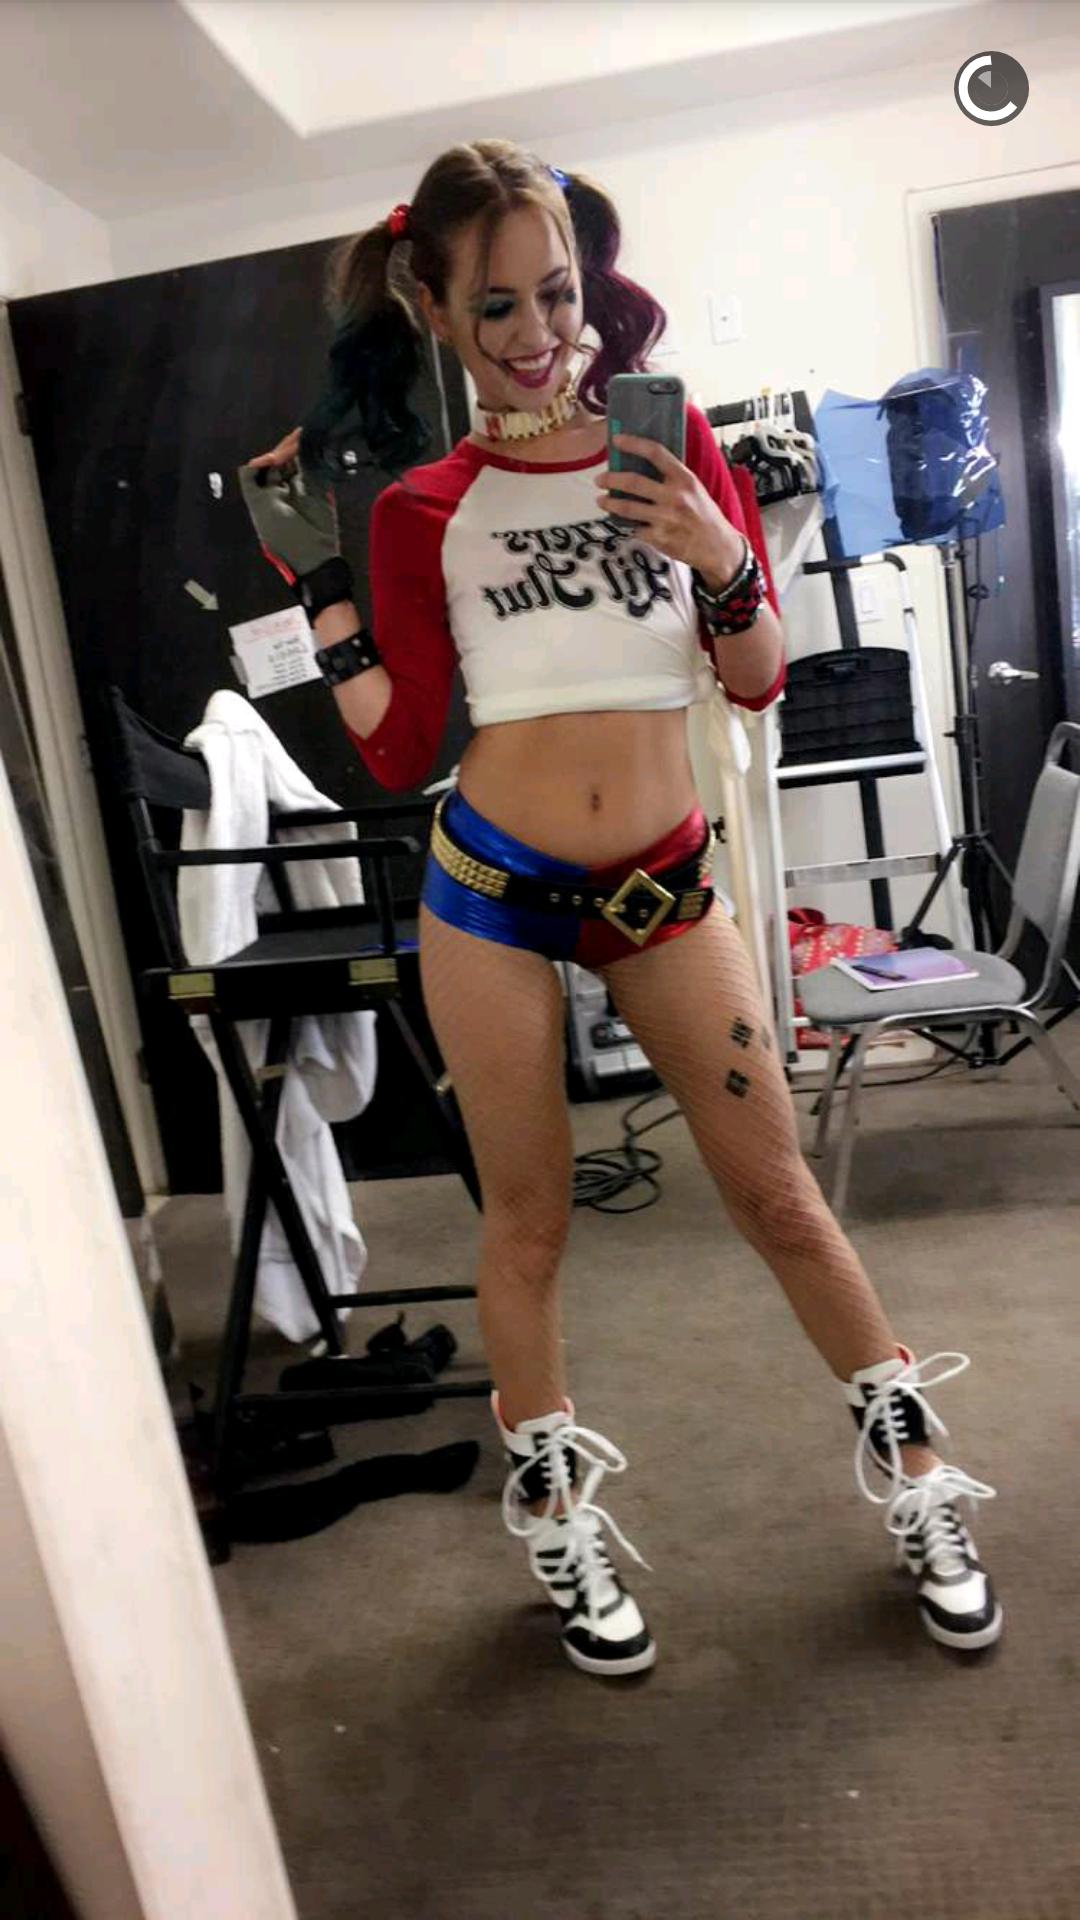 Riley Reid Brazzers Suicide Squad - Brazzers Release Suicide Squad Parody Trailers - FreeOnes Blog: Pornstars -  Models - Porn Site Reviews - Sex Videos - Behind the Scenes and more!